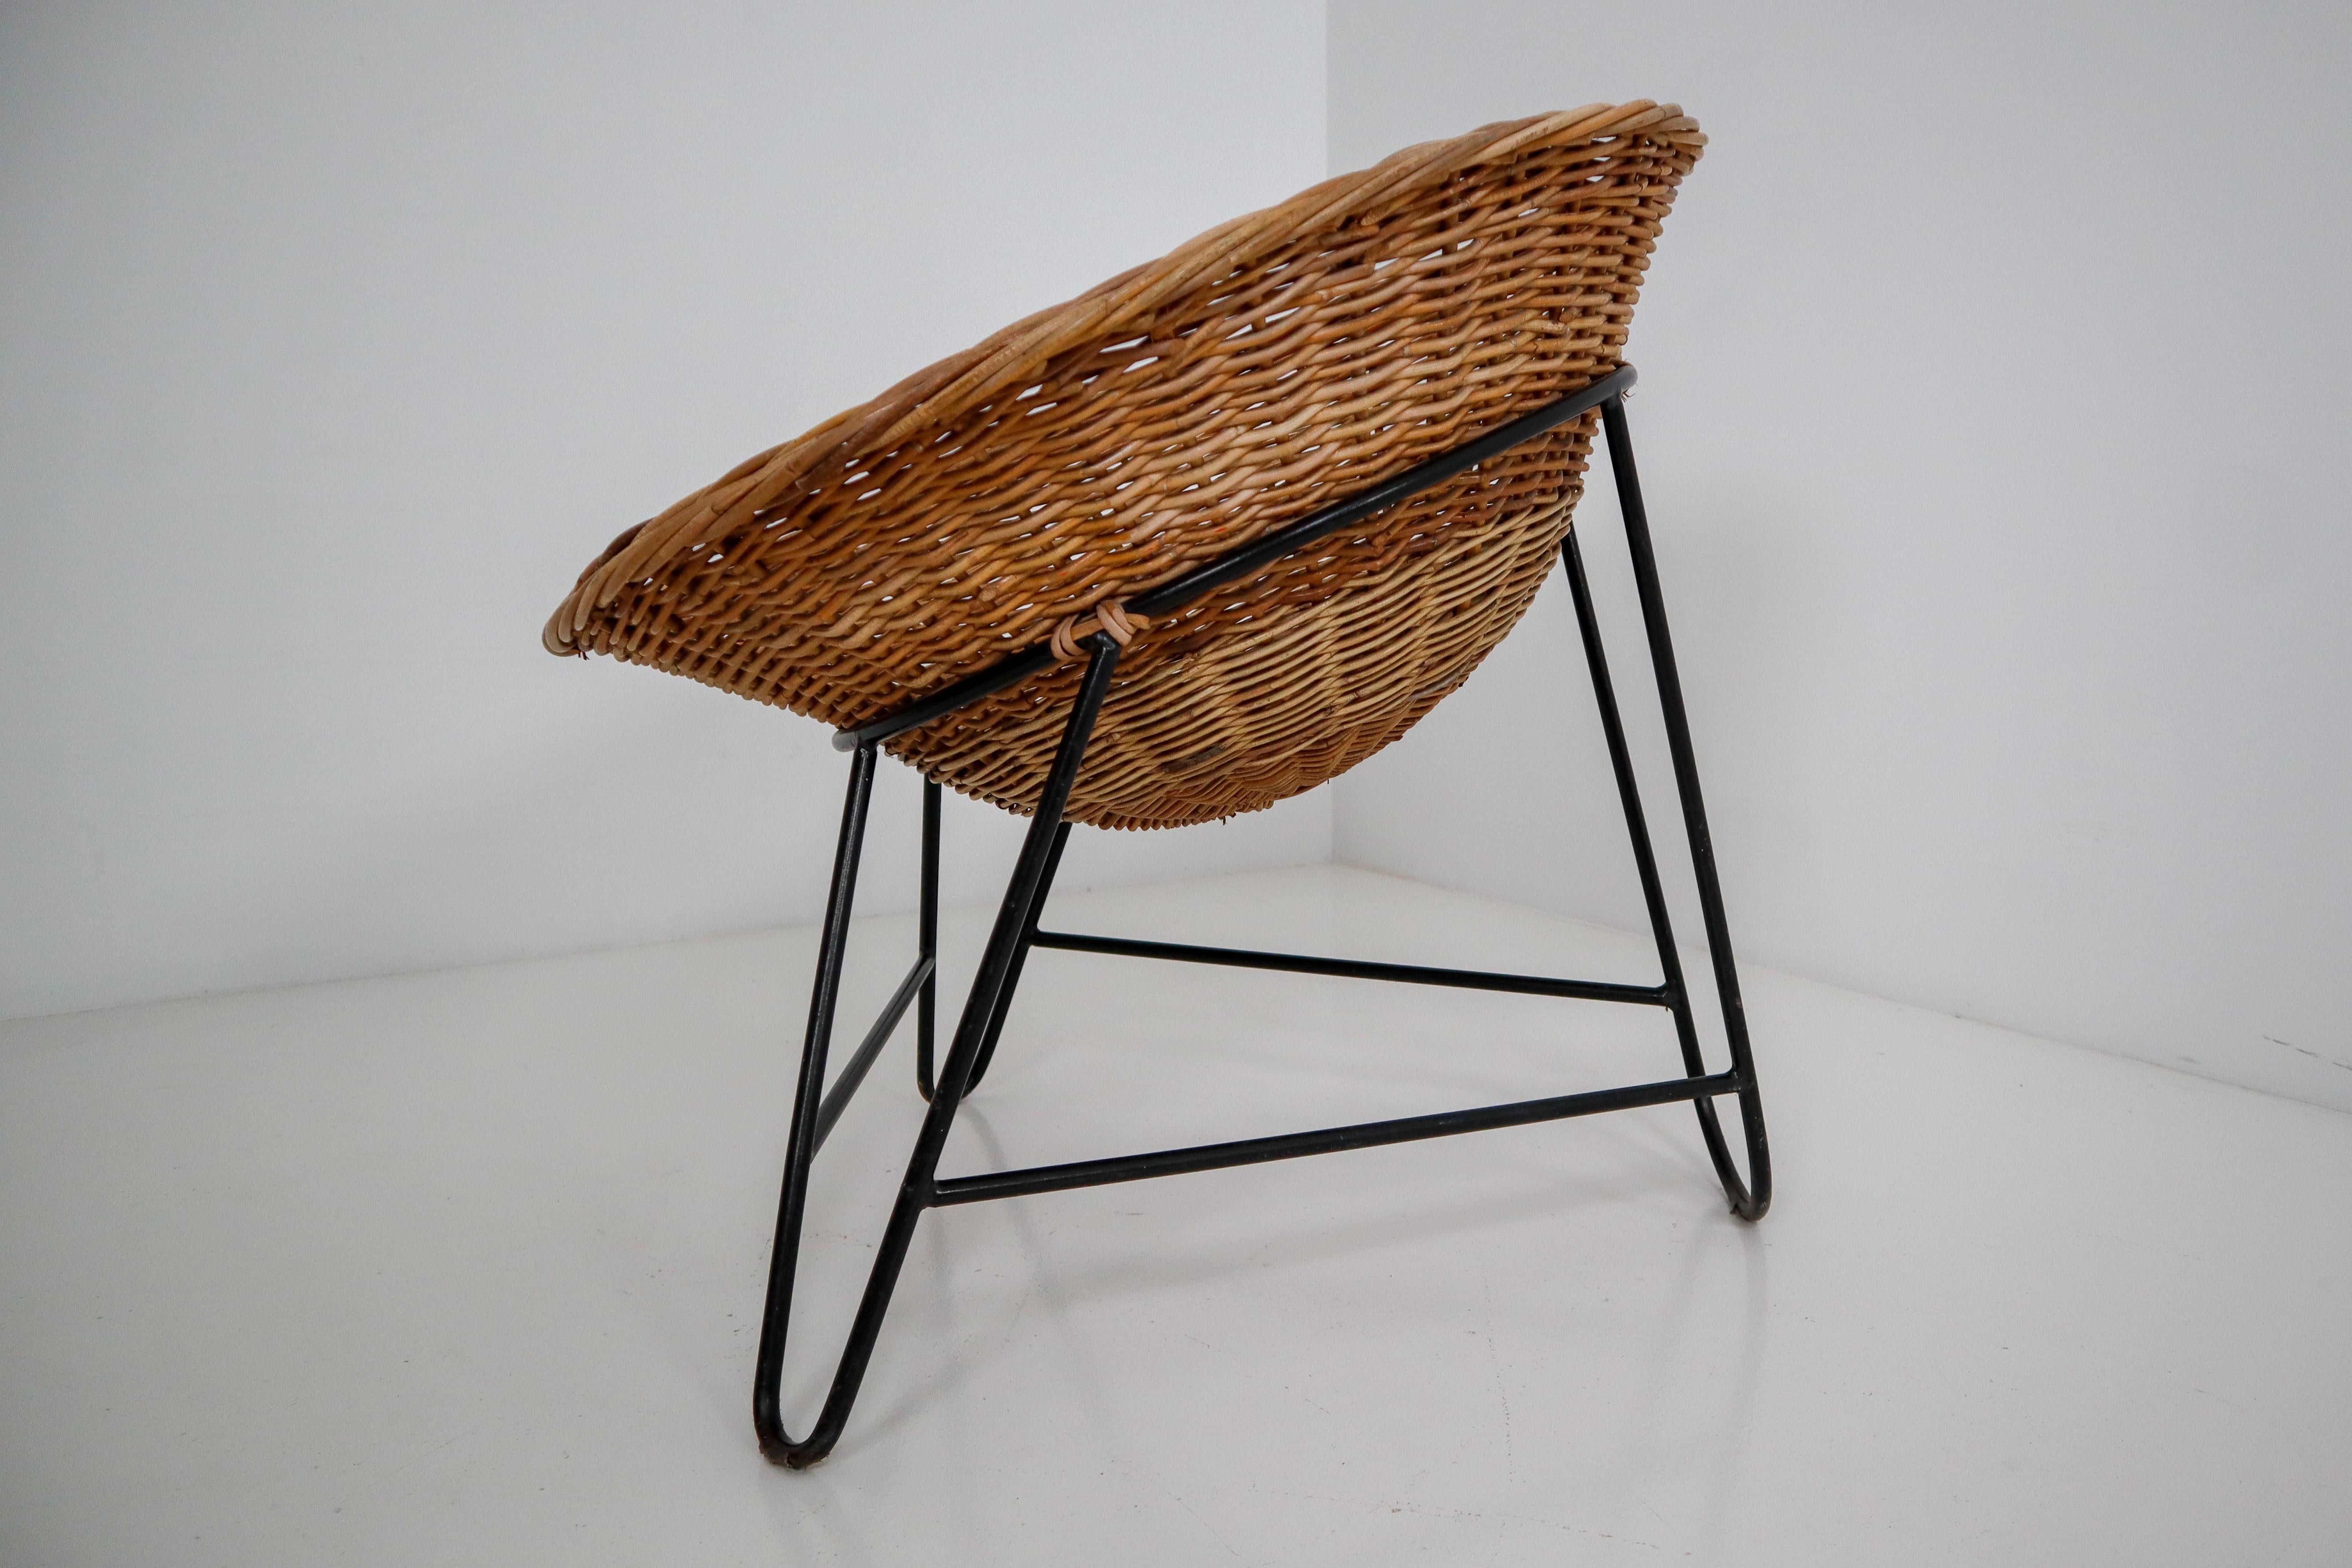 Steel Midcentury Wicker Easy Lounge Patio Chairs Designed in Europe, 1960s